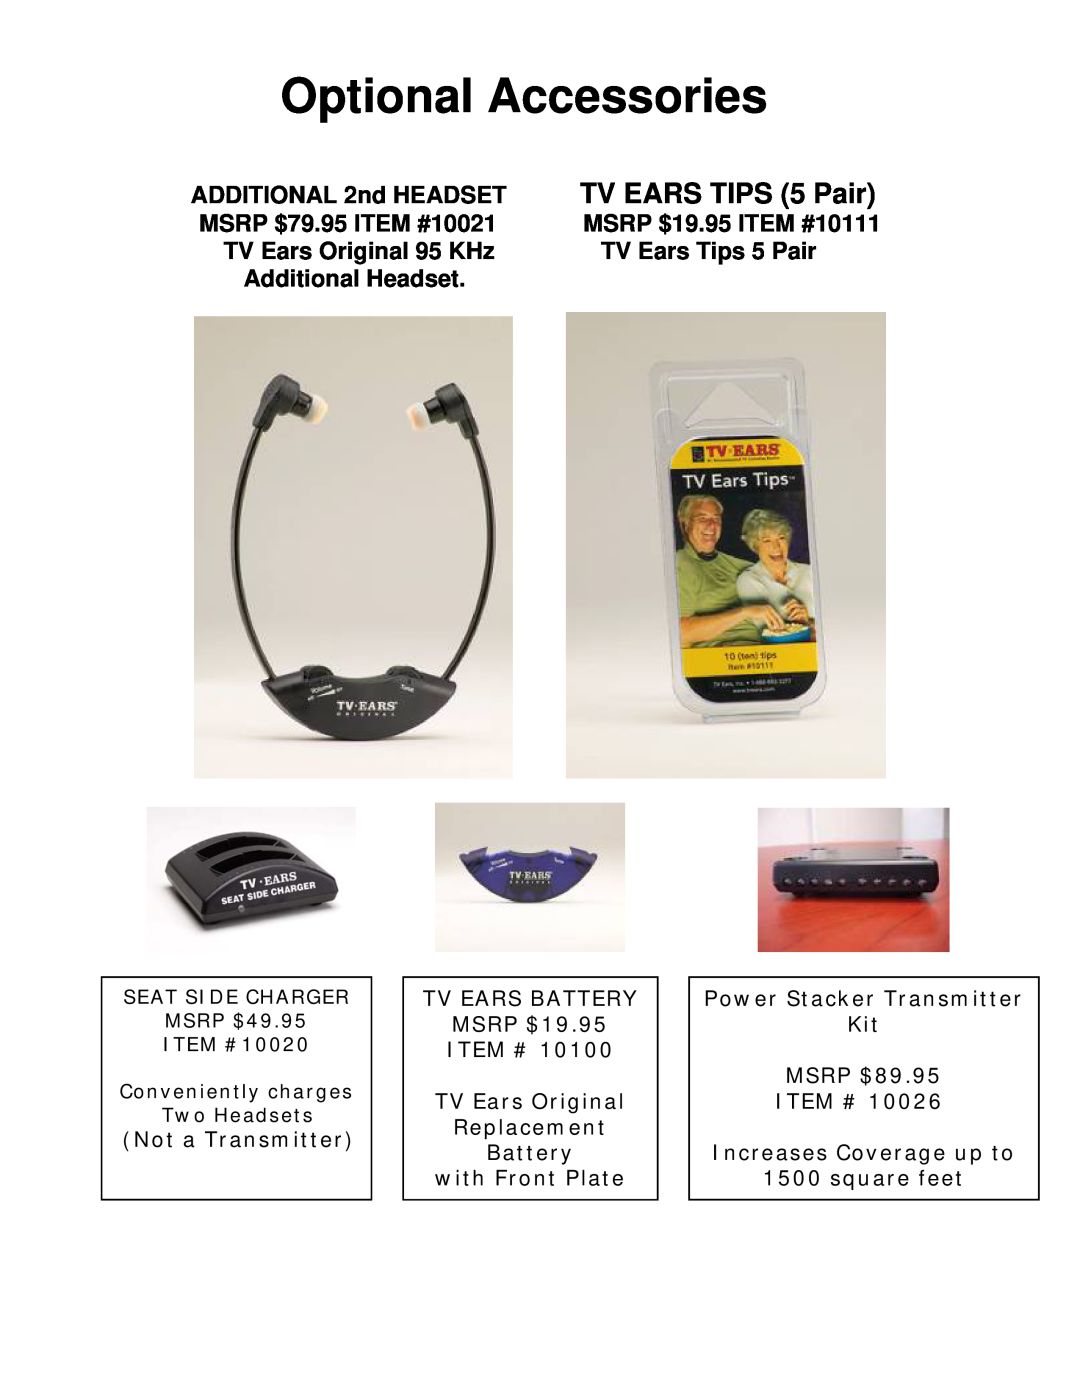 TV Ears Headphone TV EARS TIPS 5 Pair, Optional Accessories, ADDITIONAL 2nd HEADSET, MSRP $79.95 ITEM #10021 